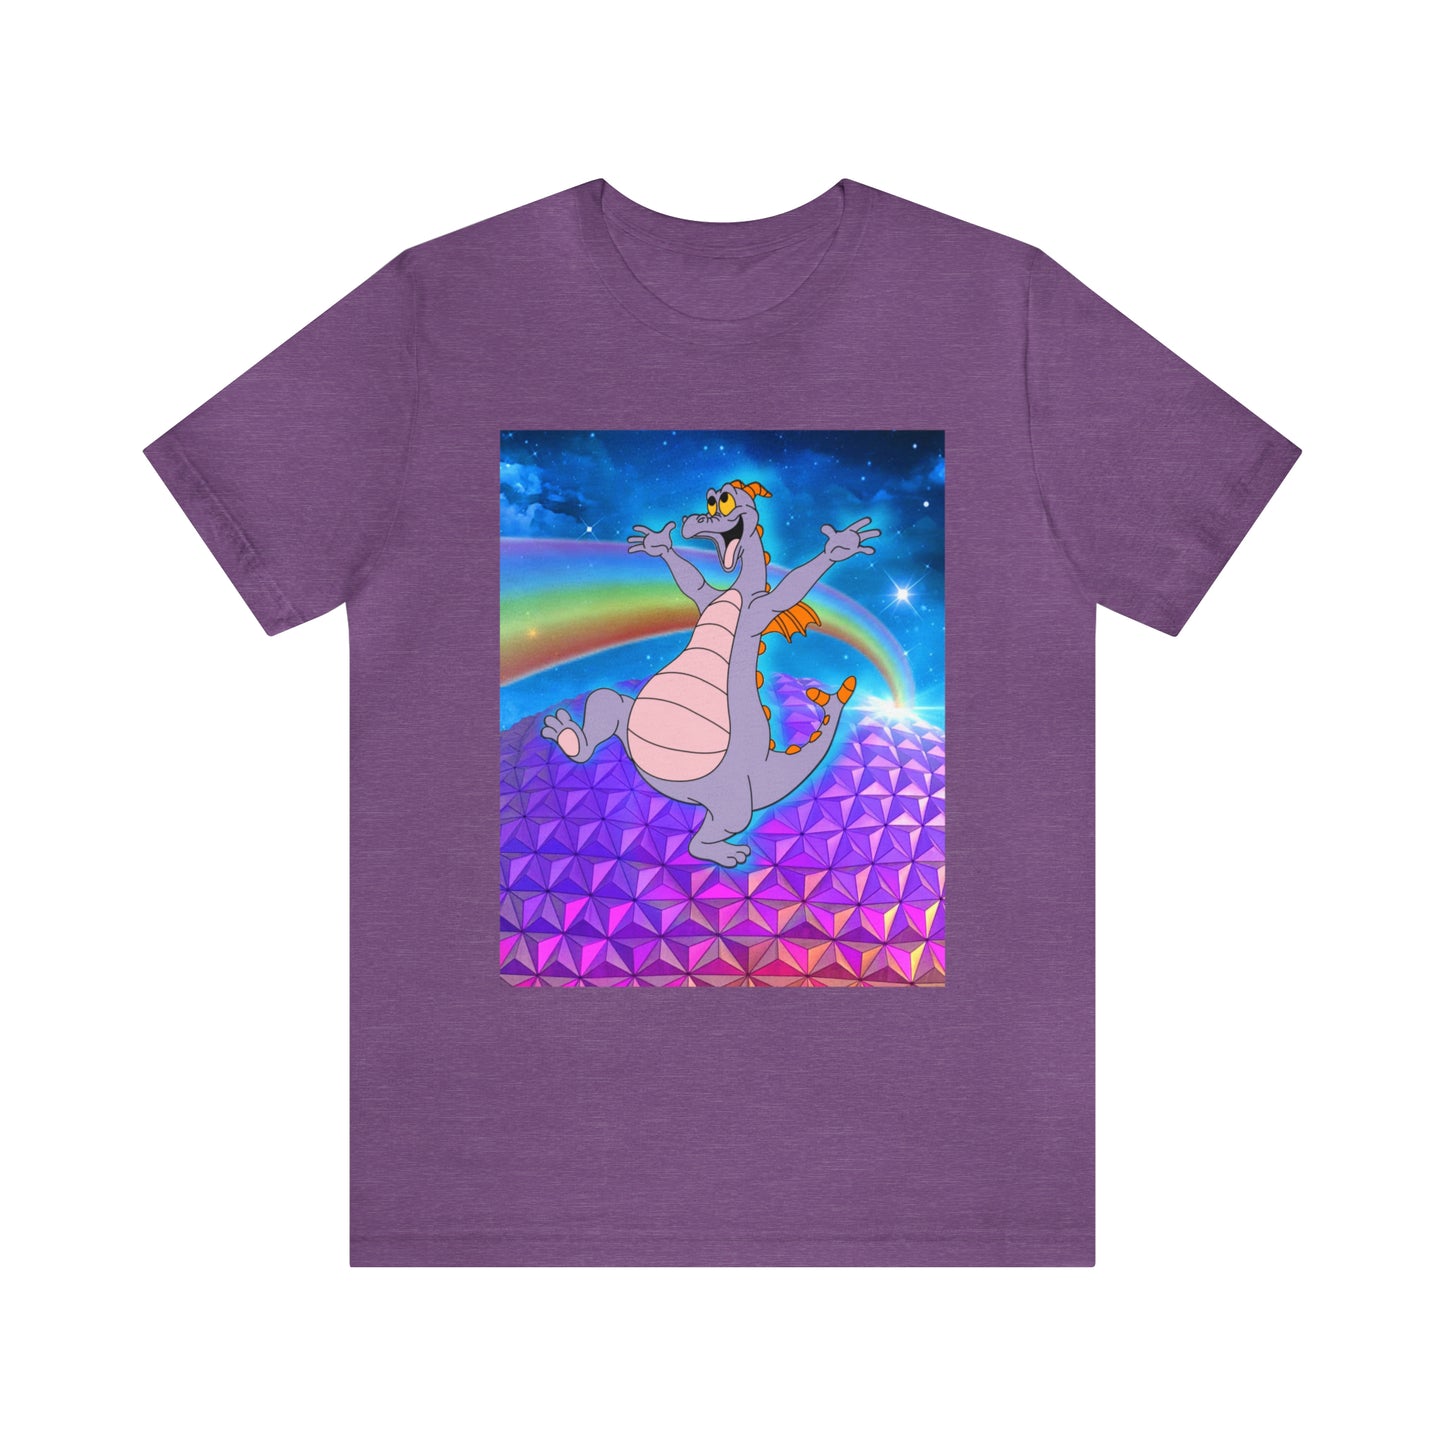 Epcot + Figment Unisex Kids or Adult T-Shirt